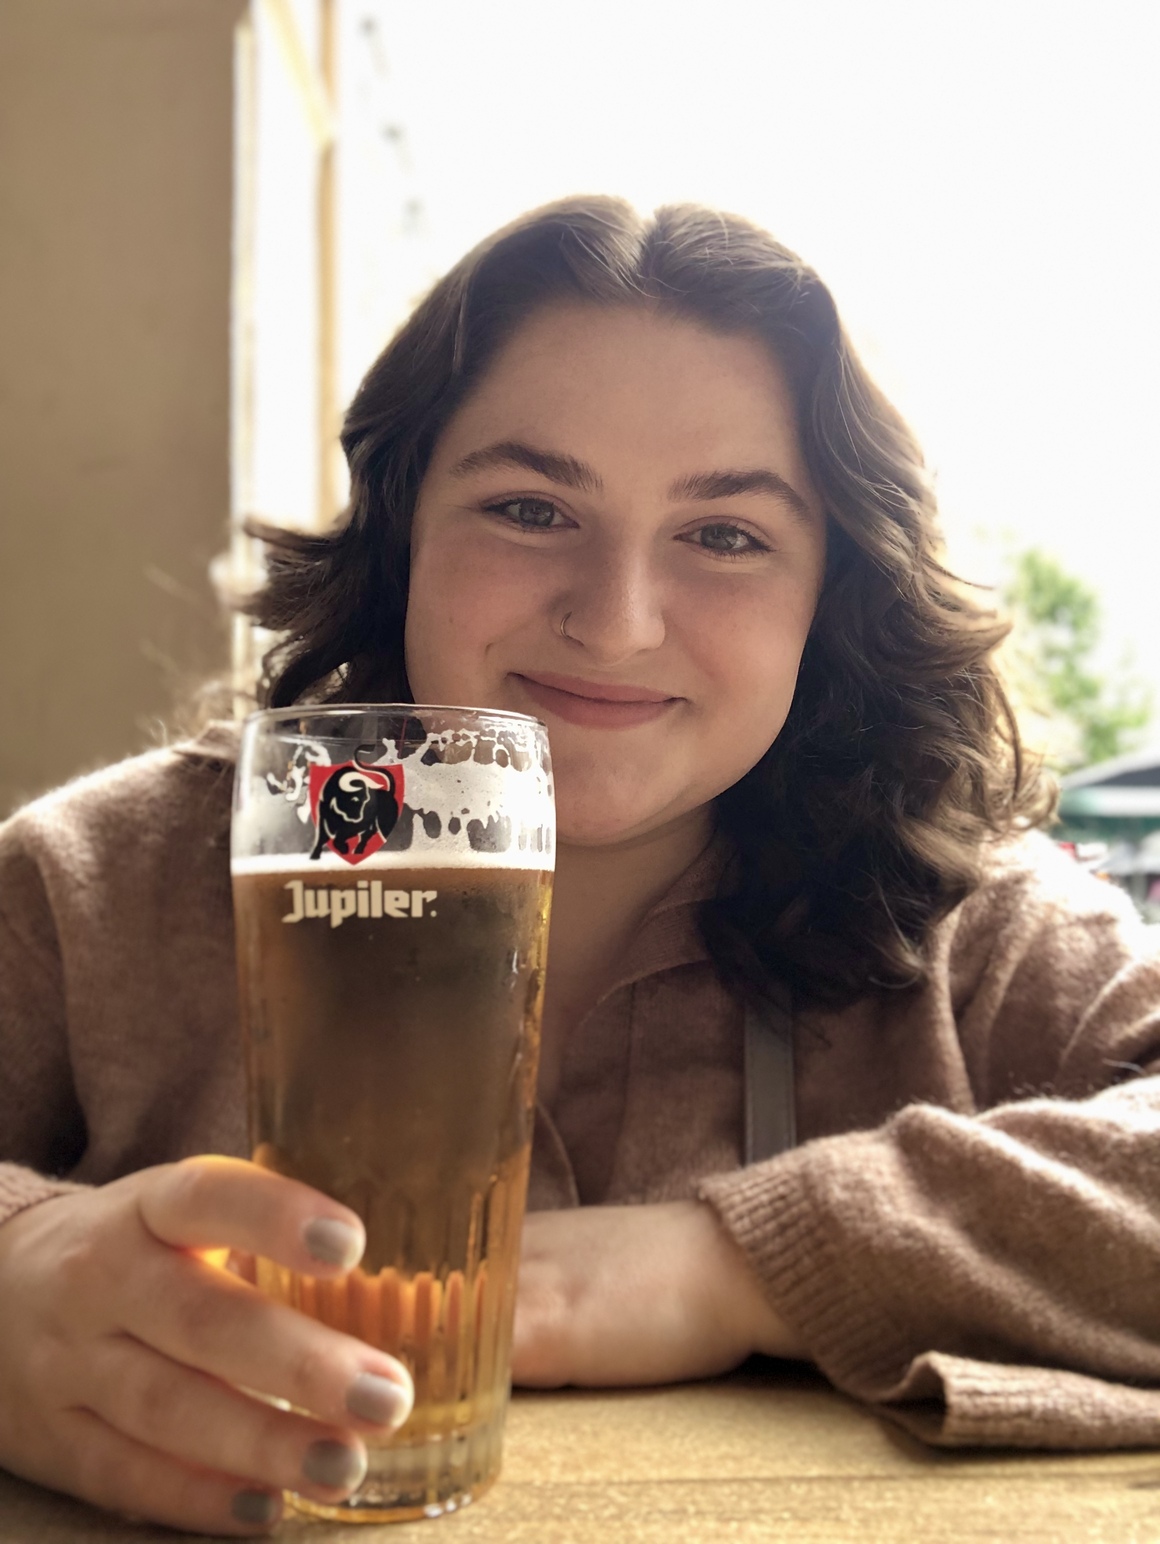 Maria smiling with a beer in Reims, France.